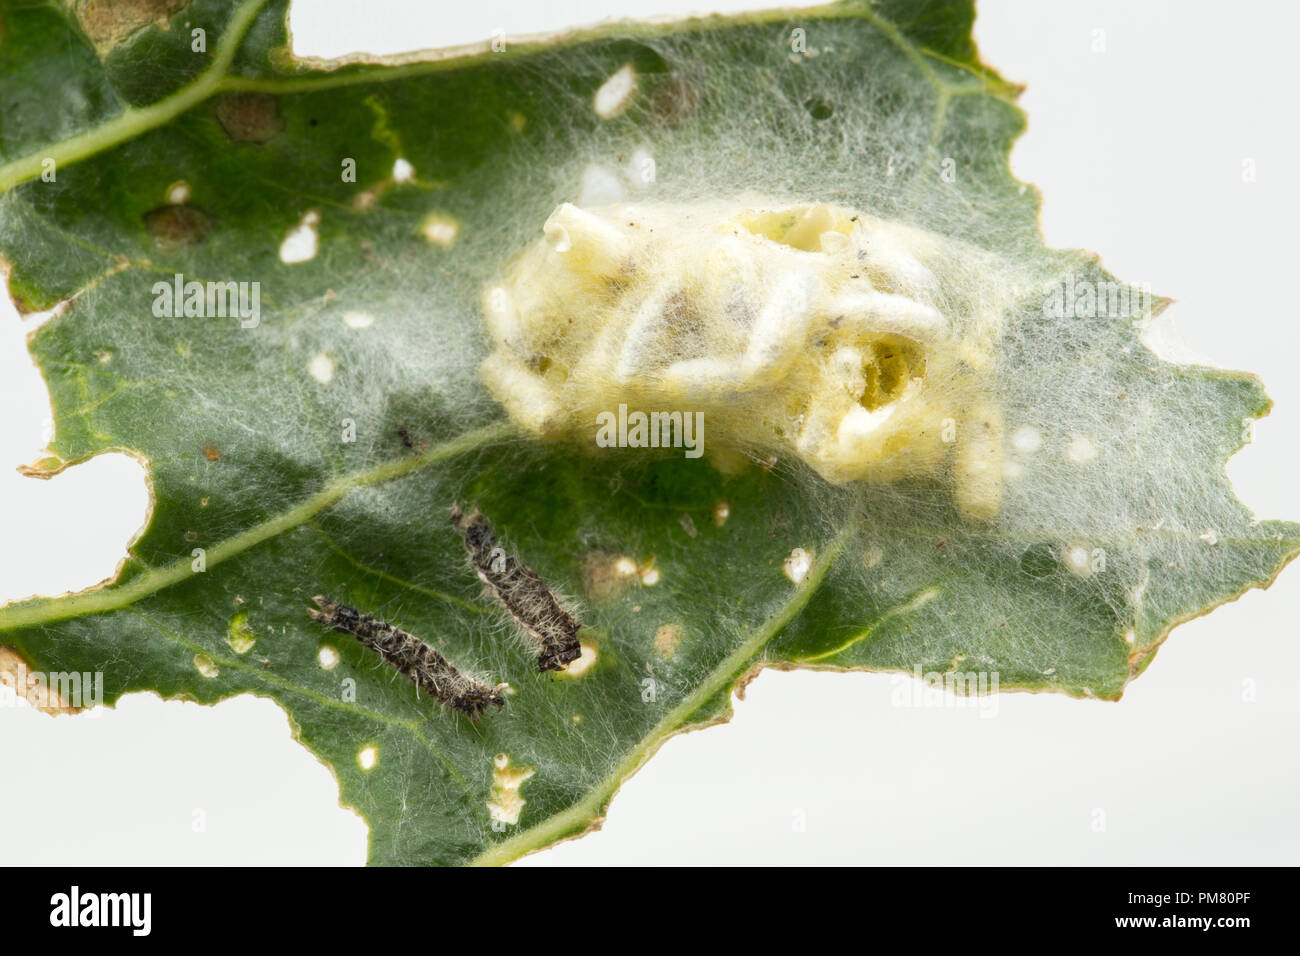 Cocoons of the larvae of a parasitic wasp, Cotesia glomerata. The wasp lays its eggs inside a caterpillar and the larvae develop inside it, ultimately Stock Photo